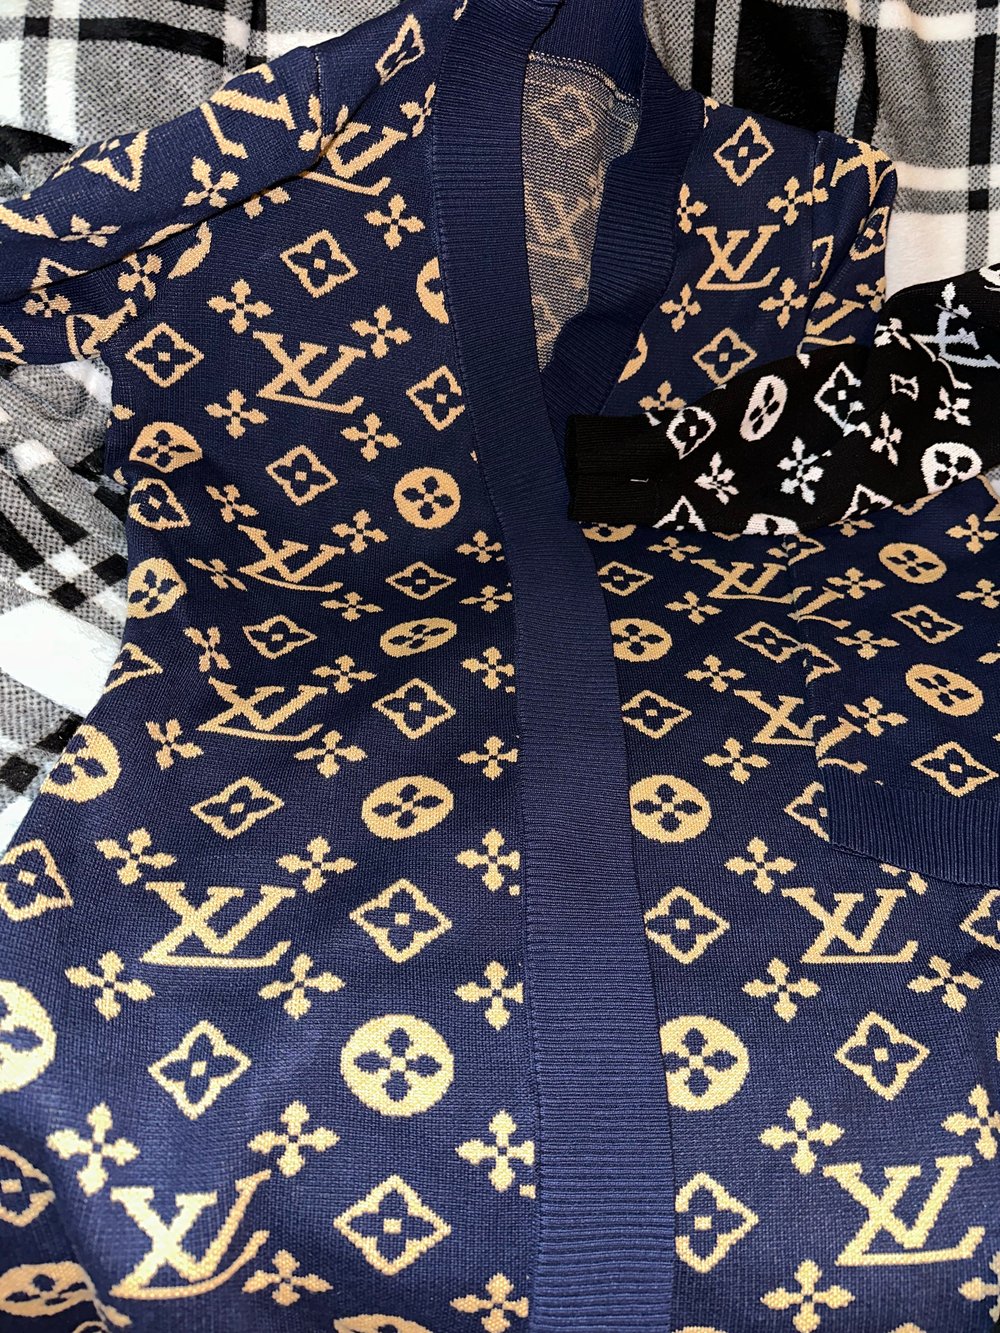 Over Sized LV Sweater 